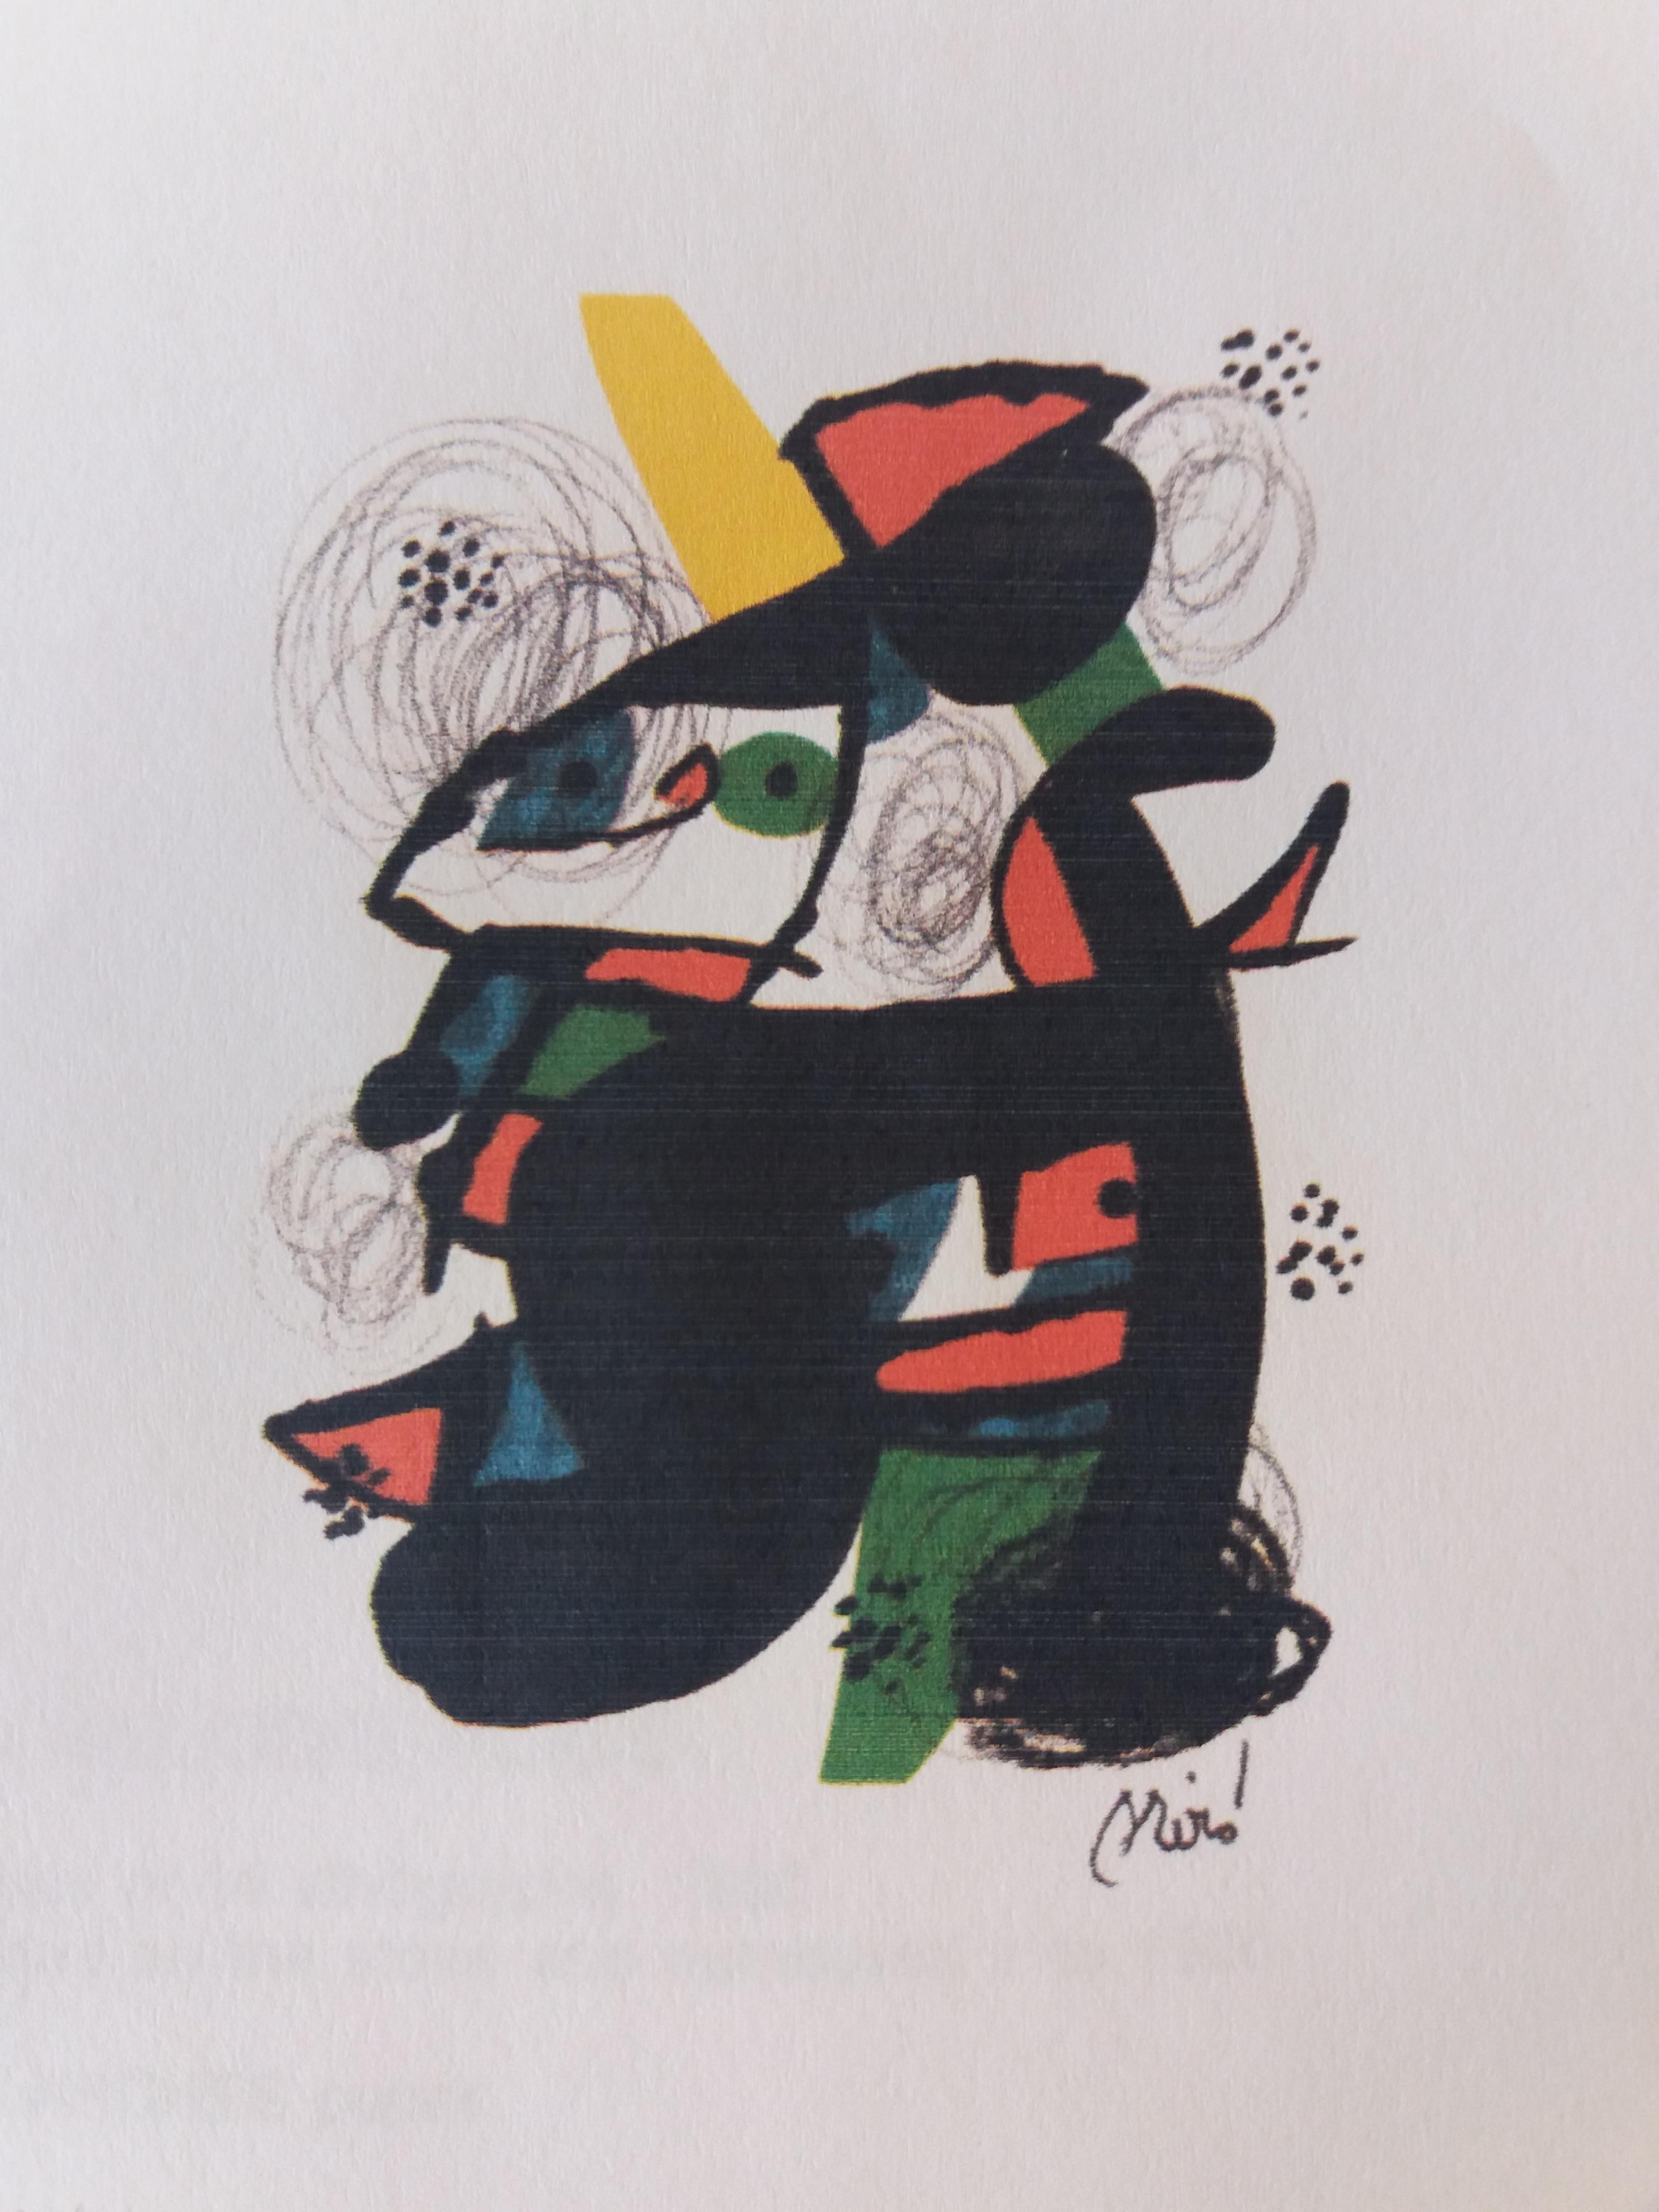 Joan Miró Abstract Print - Miro 61 melodie acide. original lithograph painting